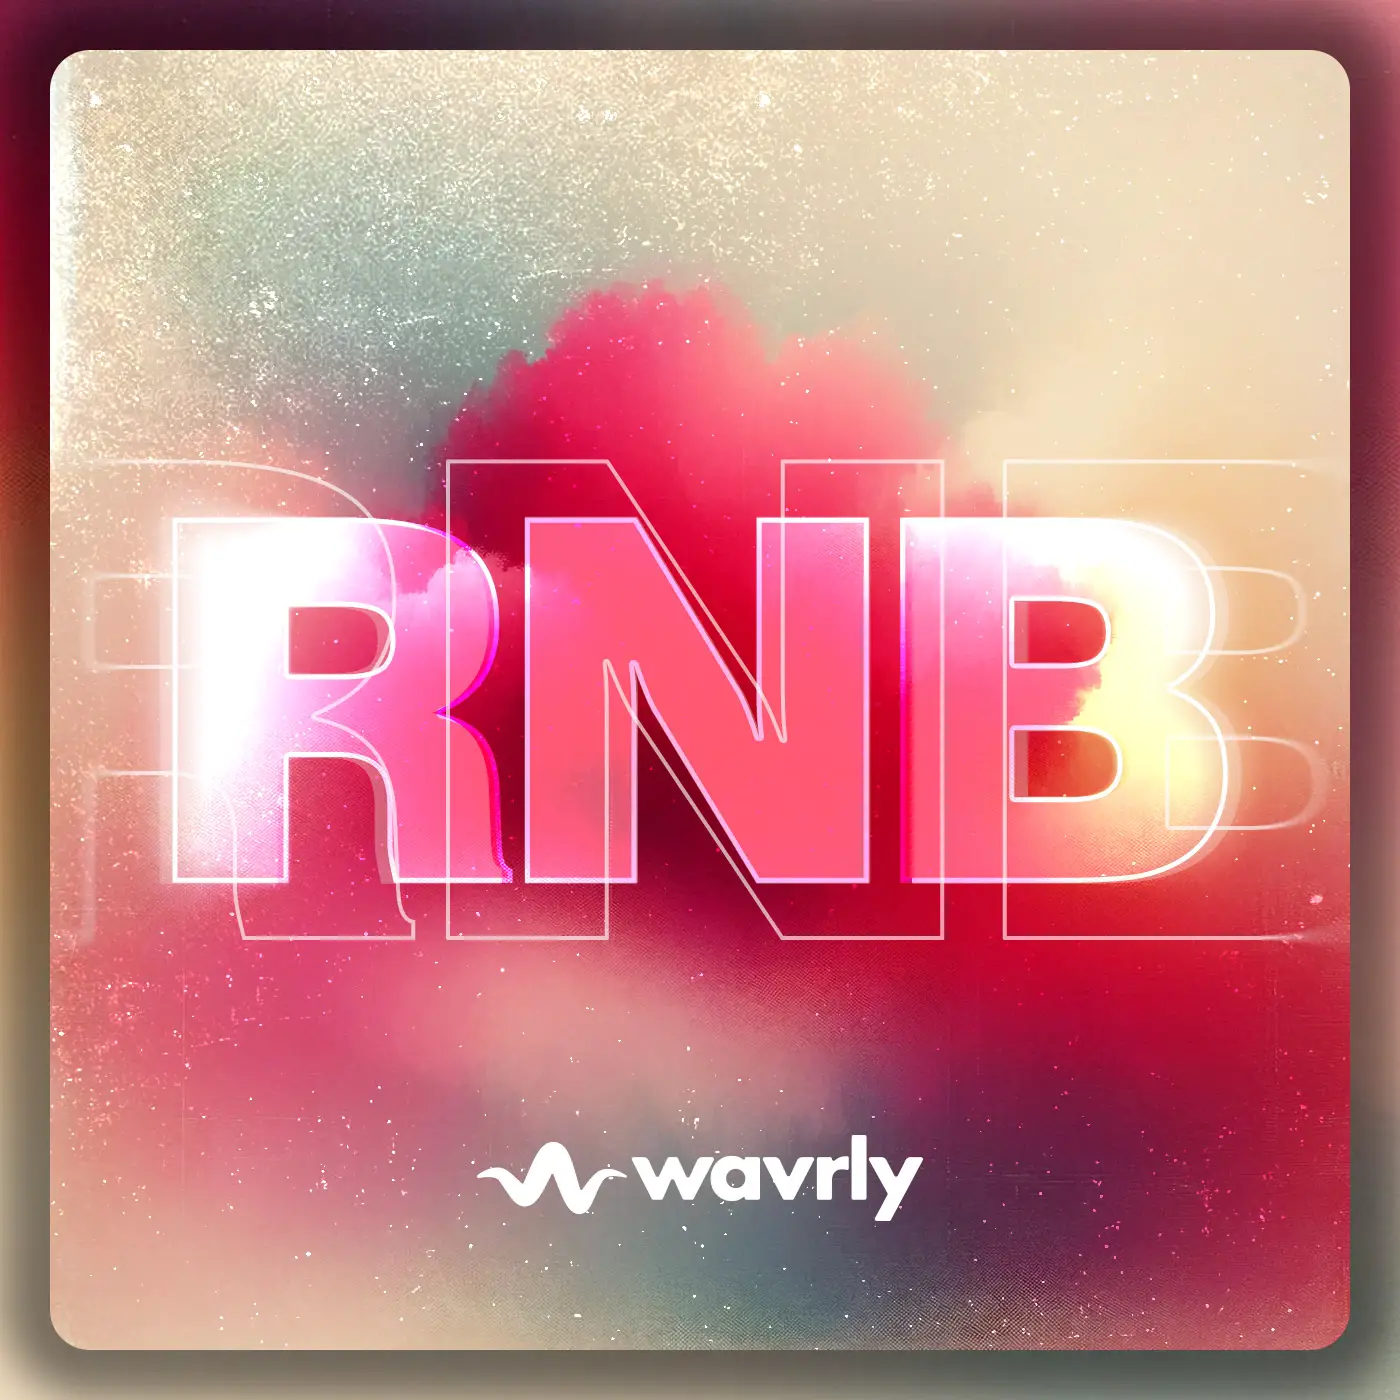 Free R&B Melodies from Wavrly.com